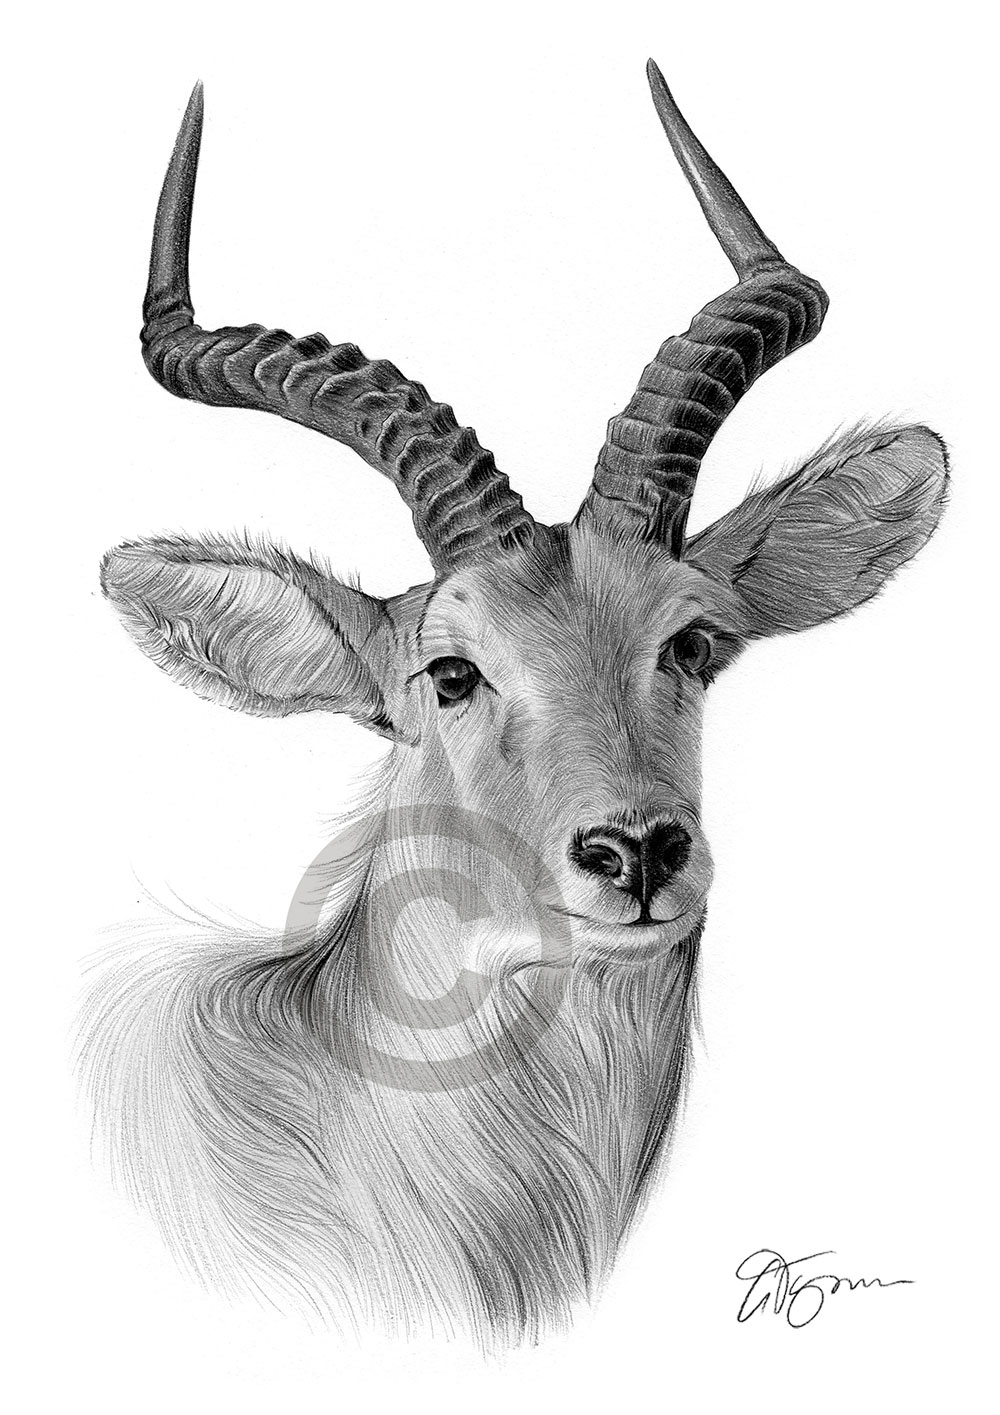 Pencil drawing of an antelope by artist Gary Tymon